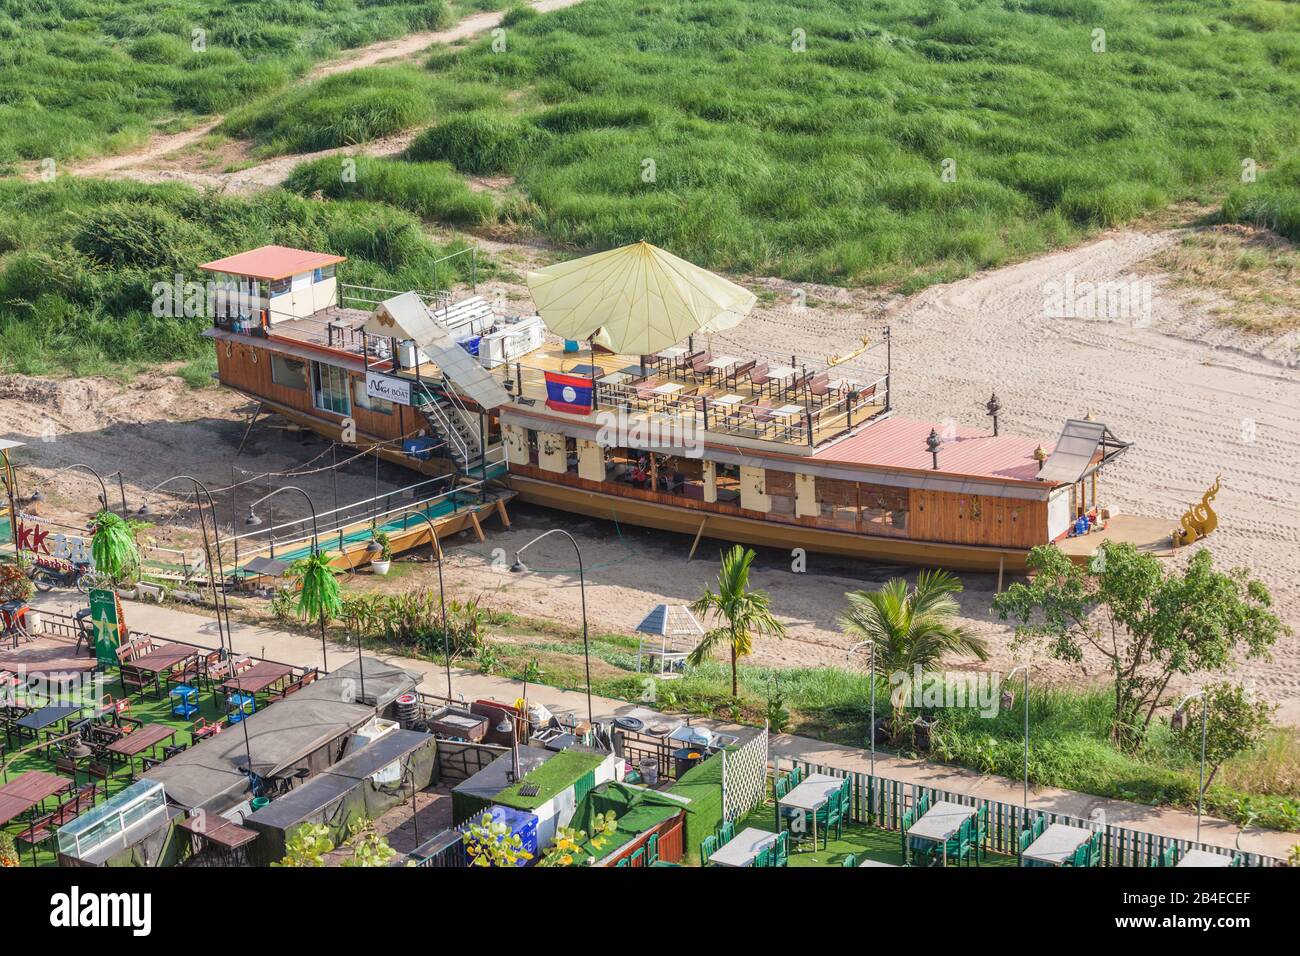 Laos, Vientiane, high angle view of Mekong Riverfront restaurant Stock Photo